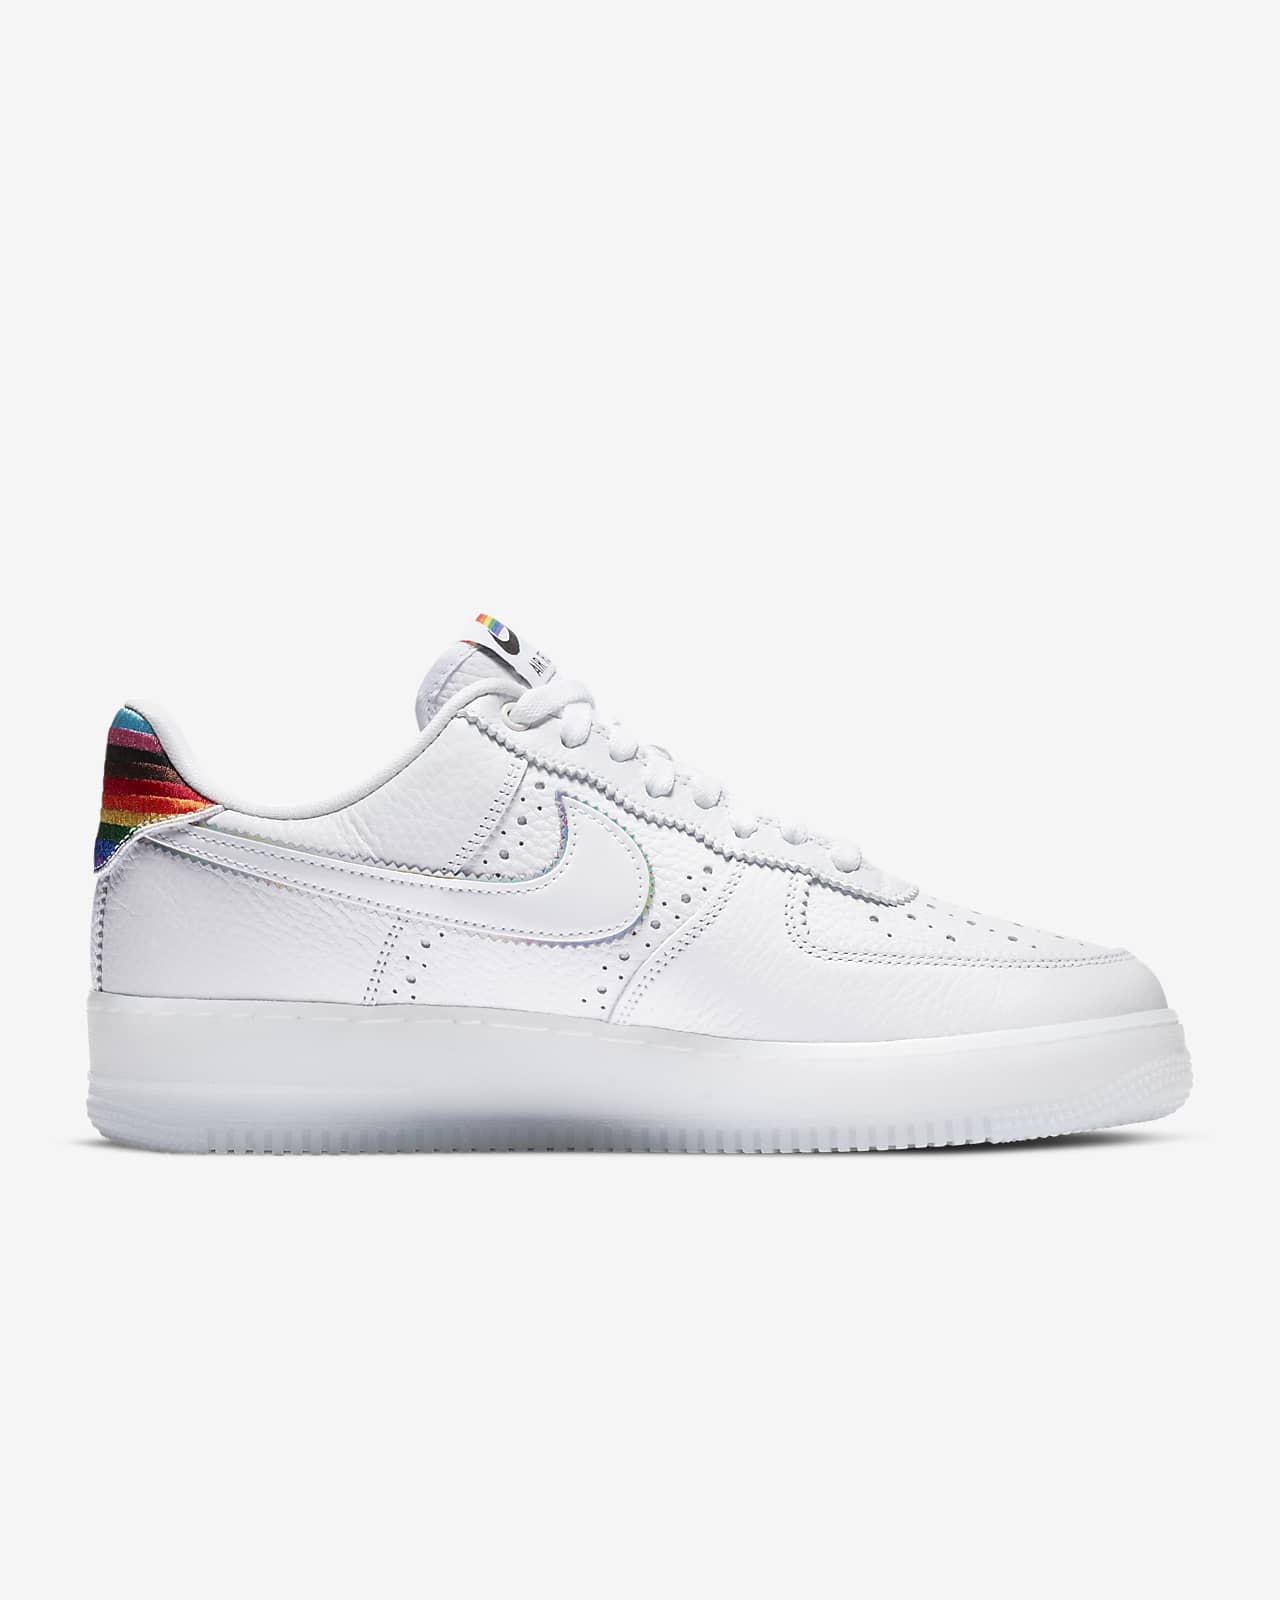 nike air force one betrue